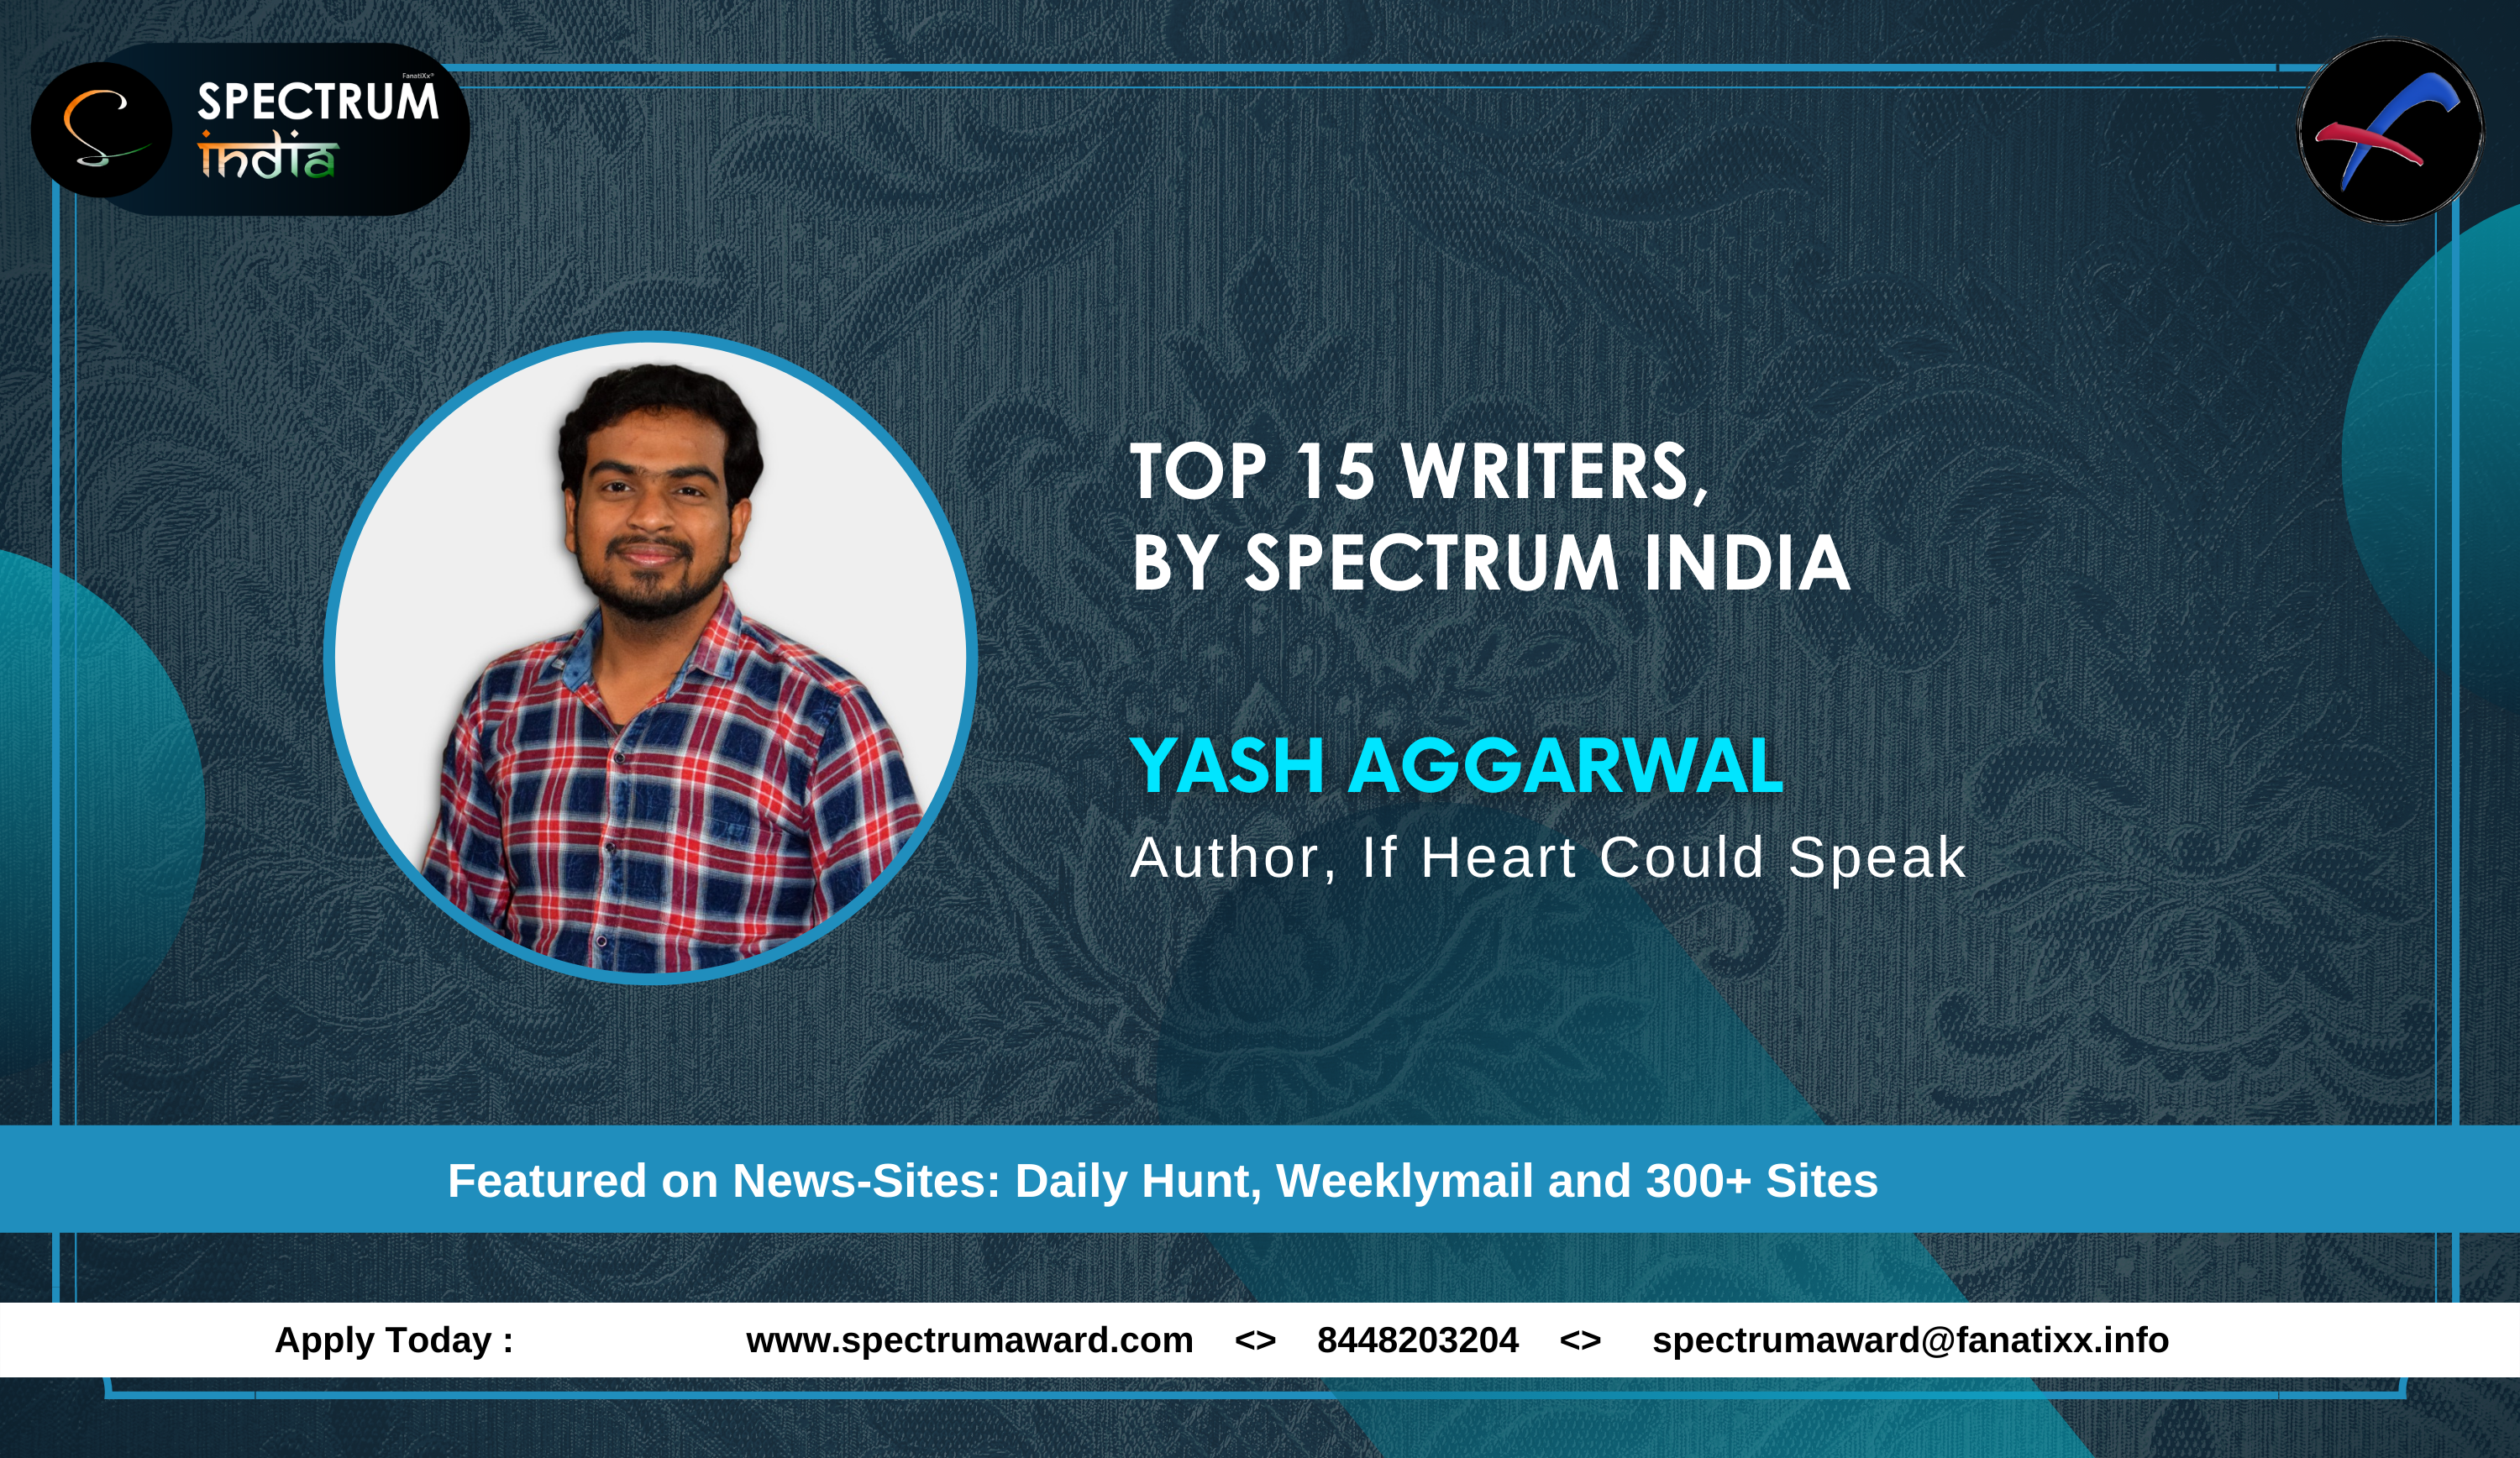 Yash Aggarwal, listed among Top 15 Writers by Spectrum India